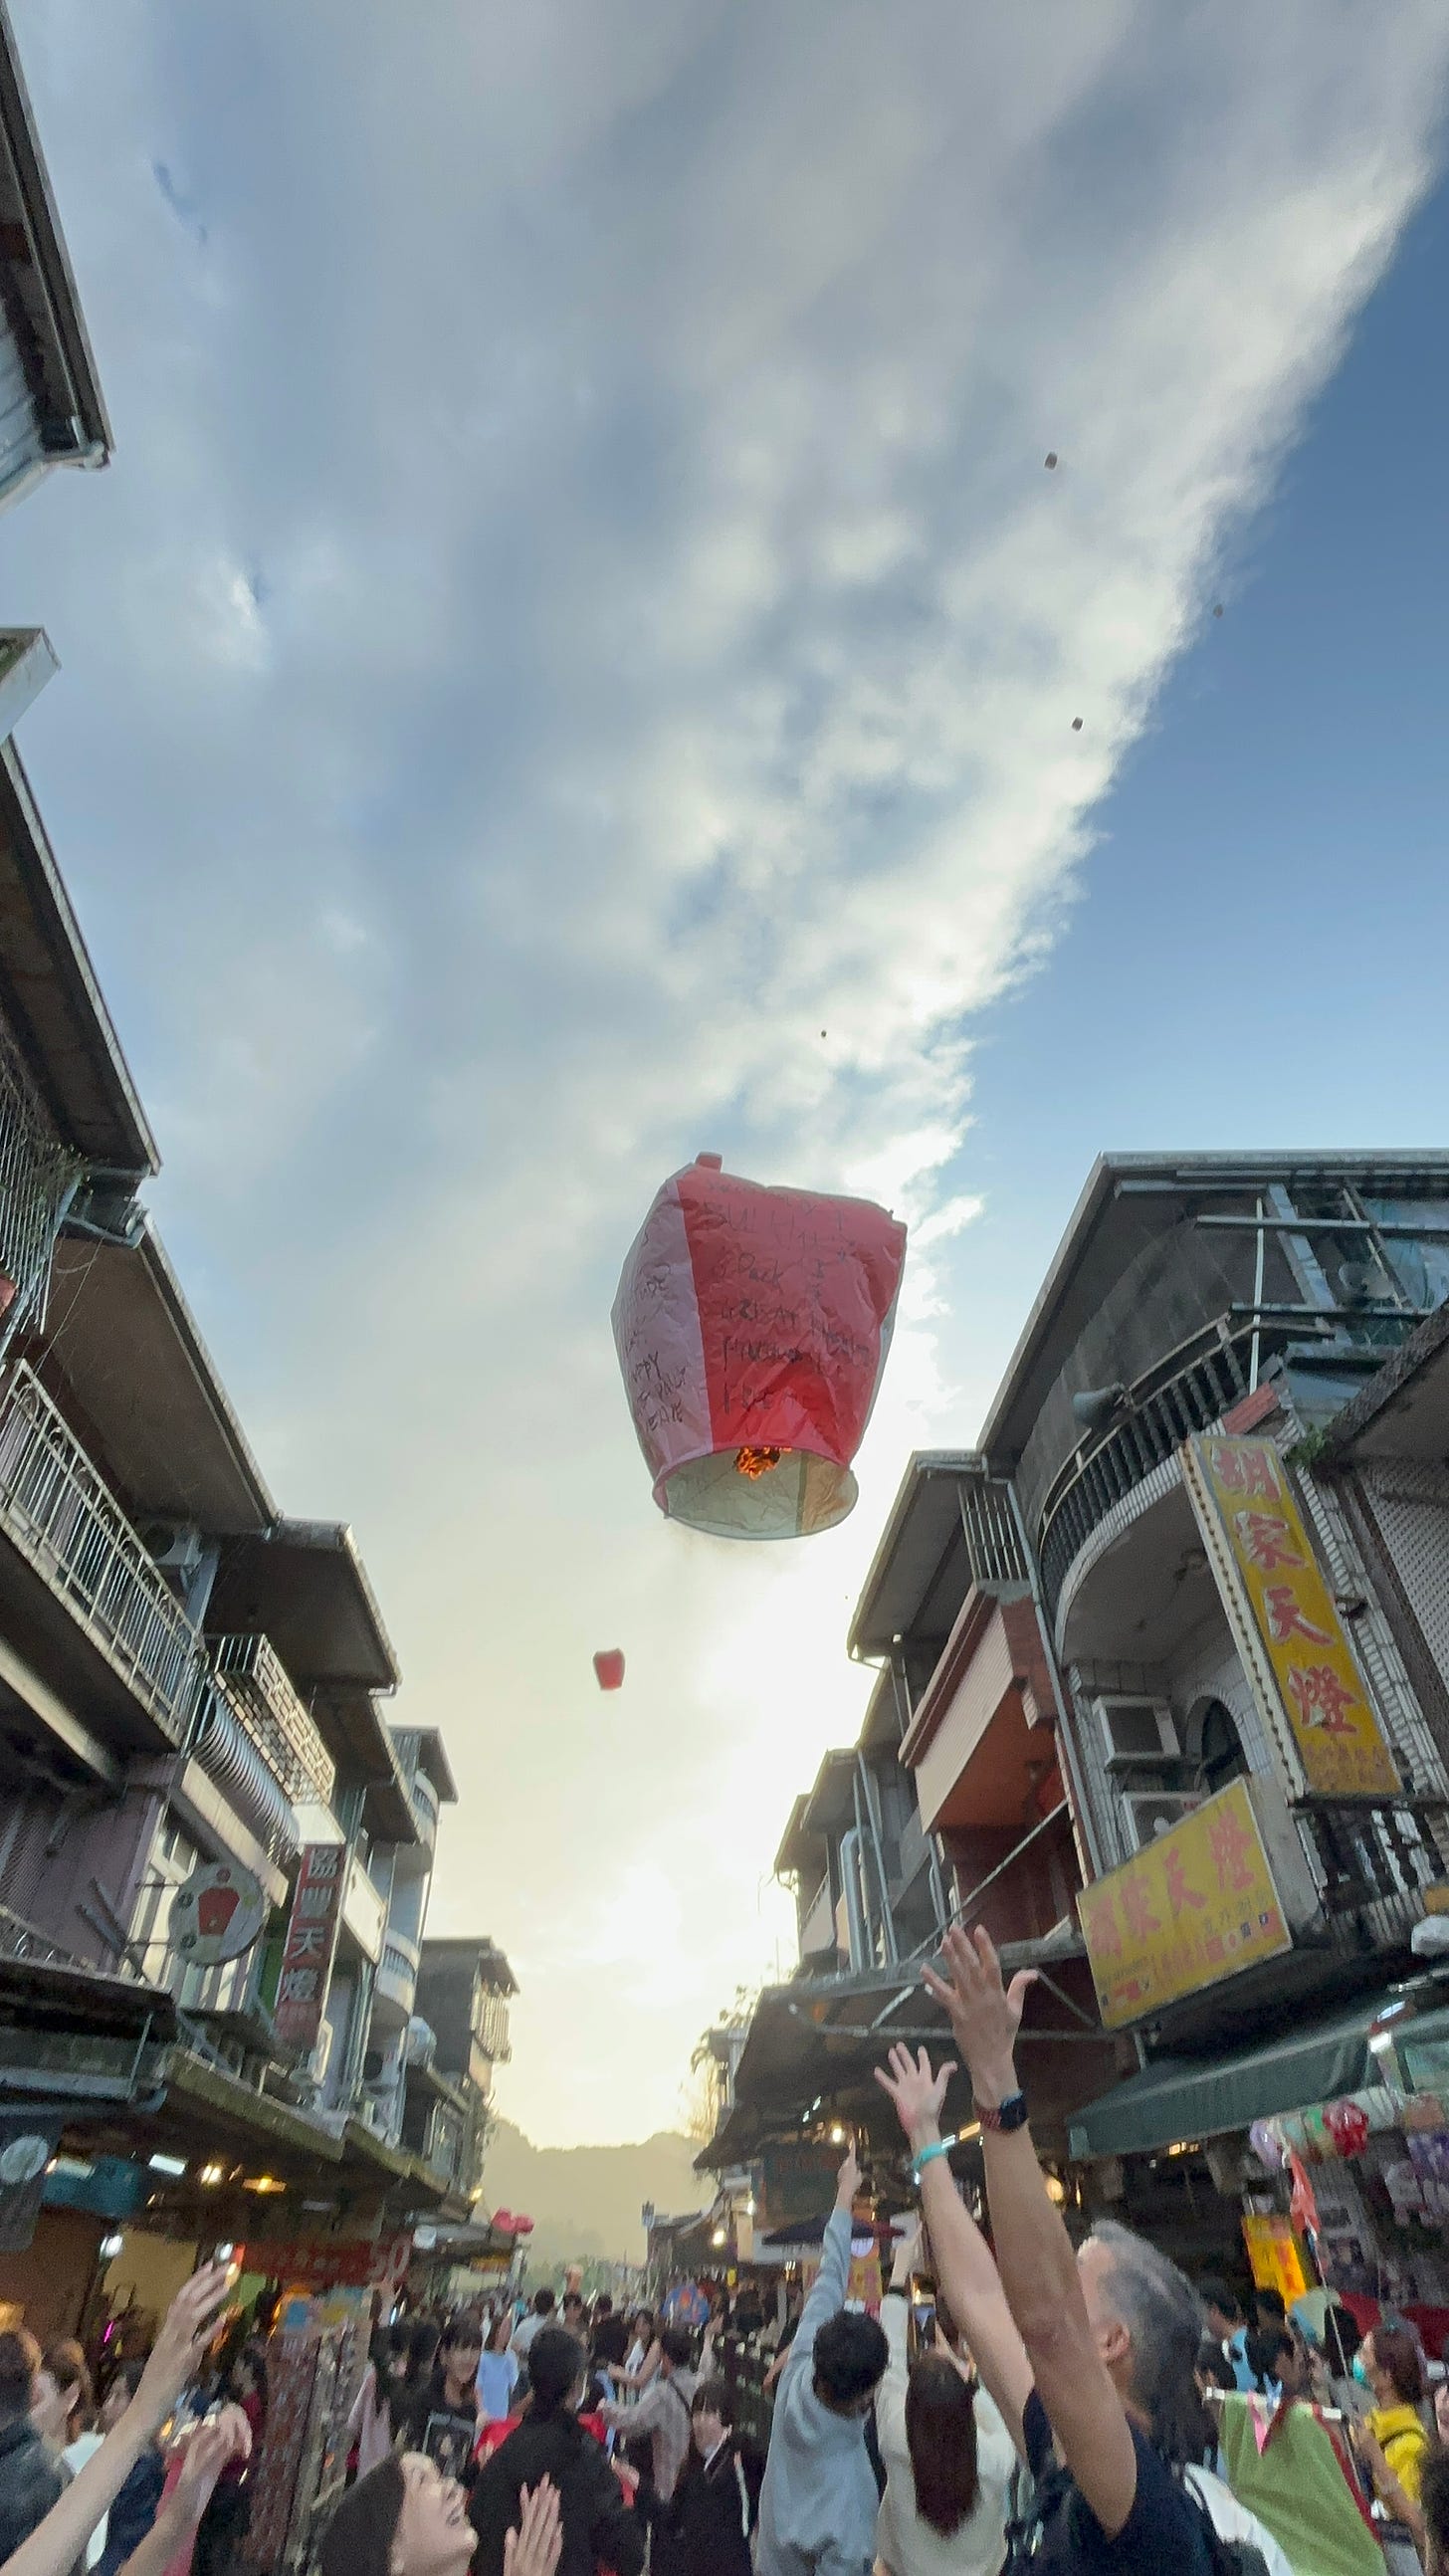 Sky lantern wishes for the new year